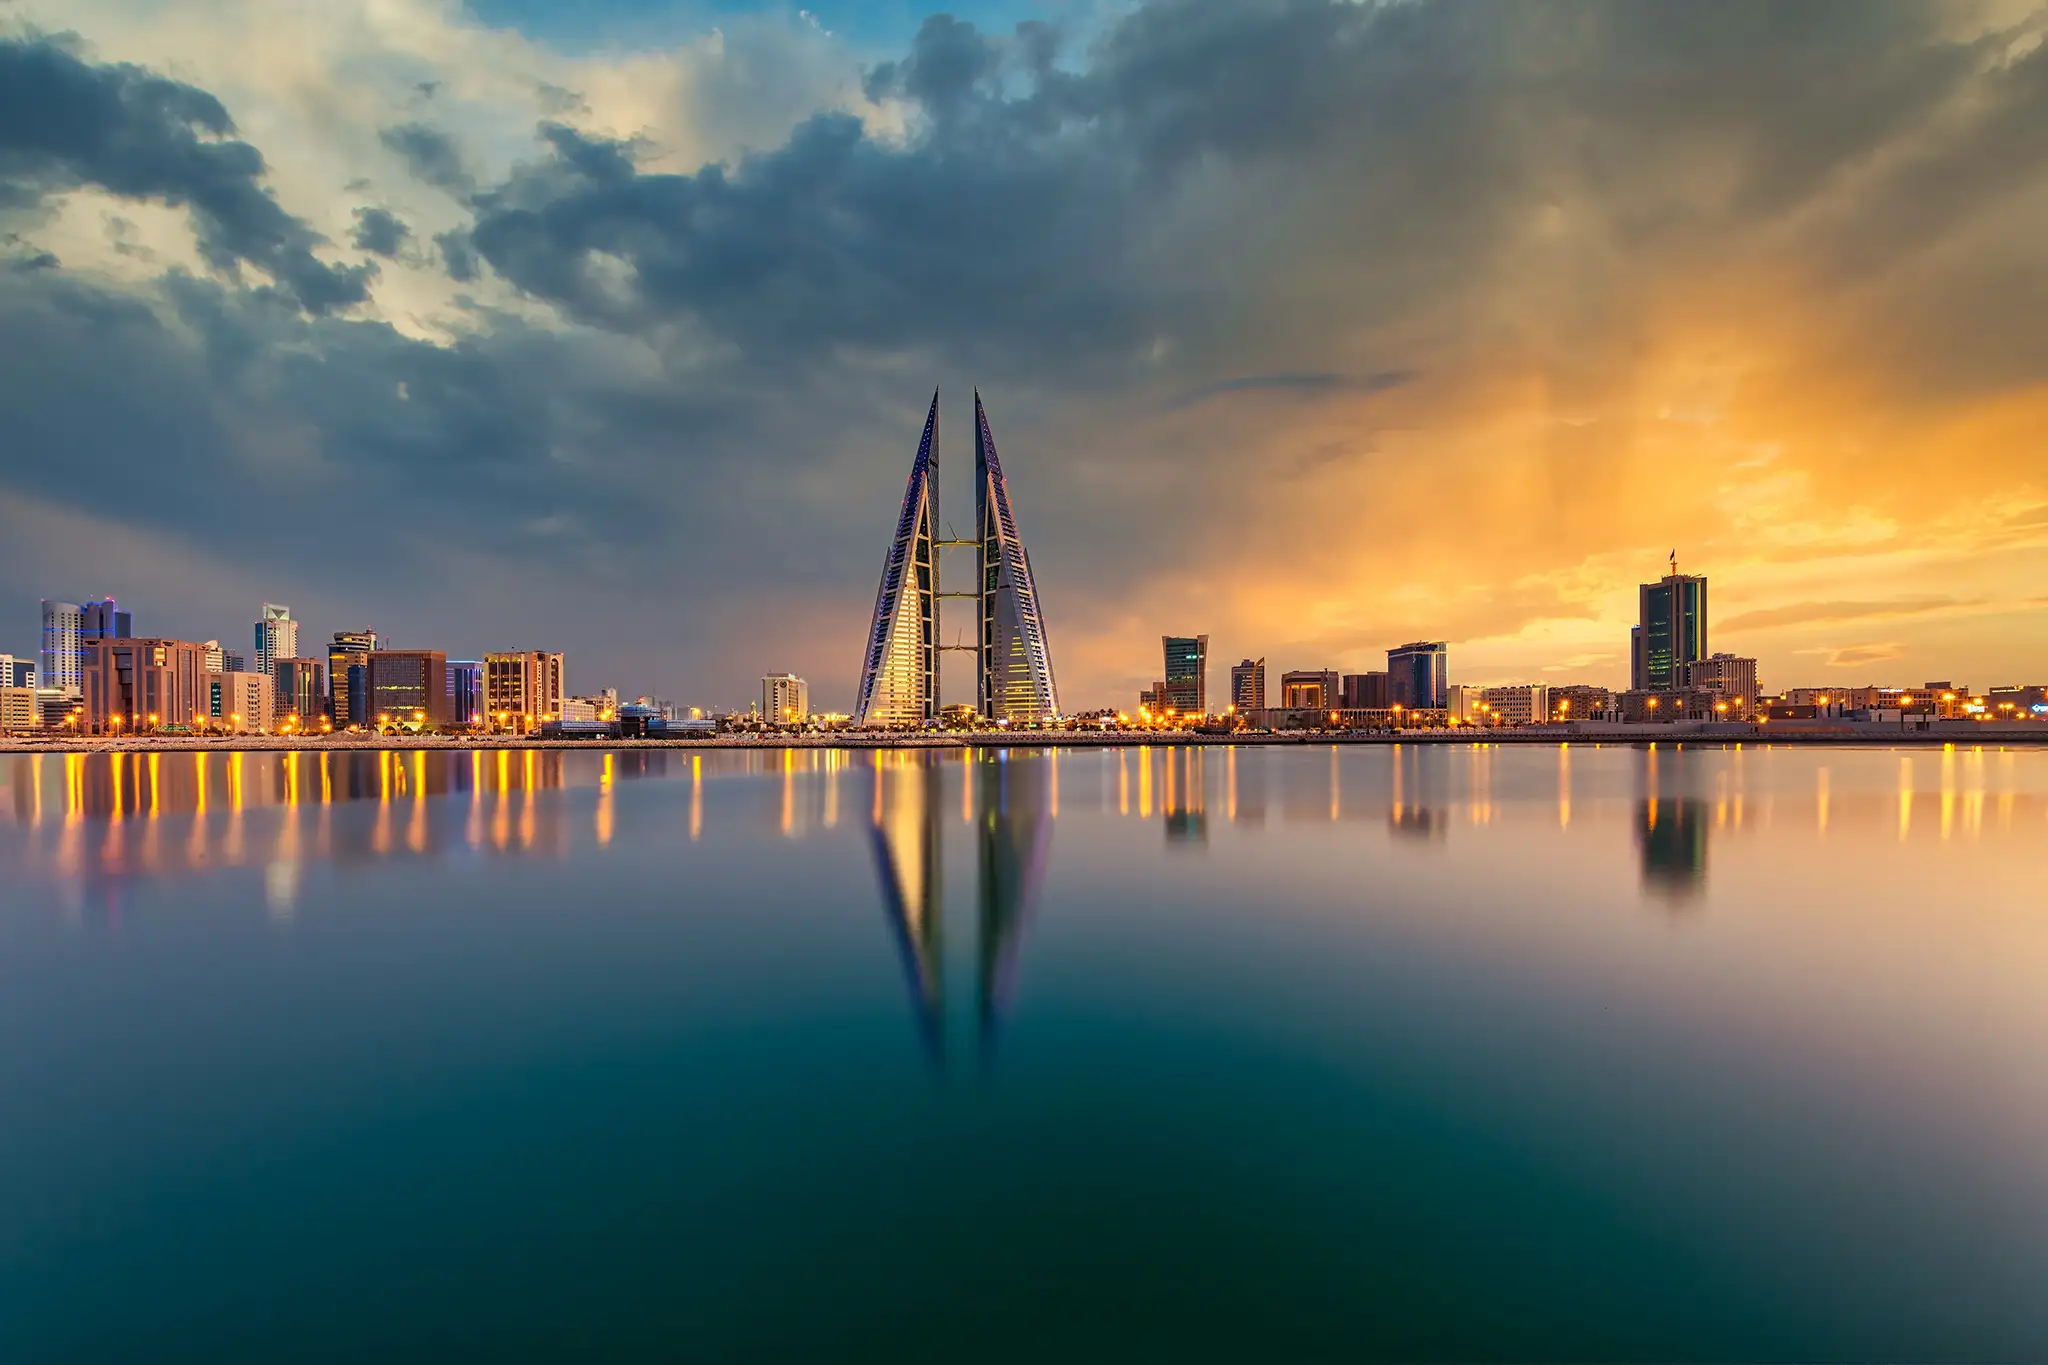 View of Bahrain skyline with World trade center along with a dramatic sky.